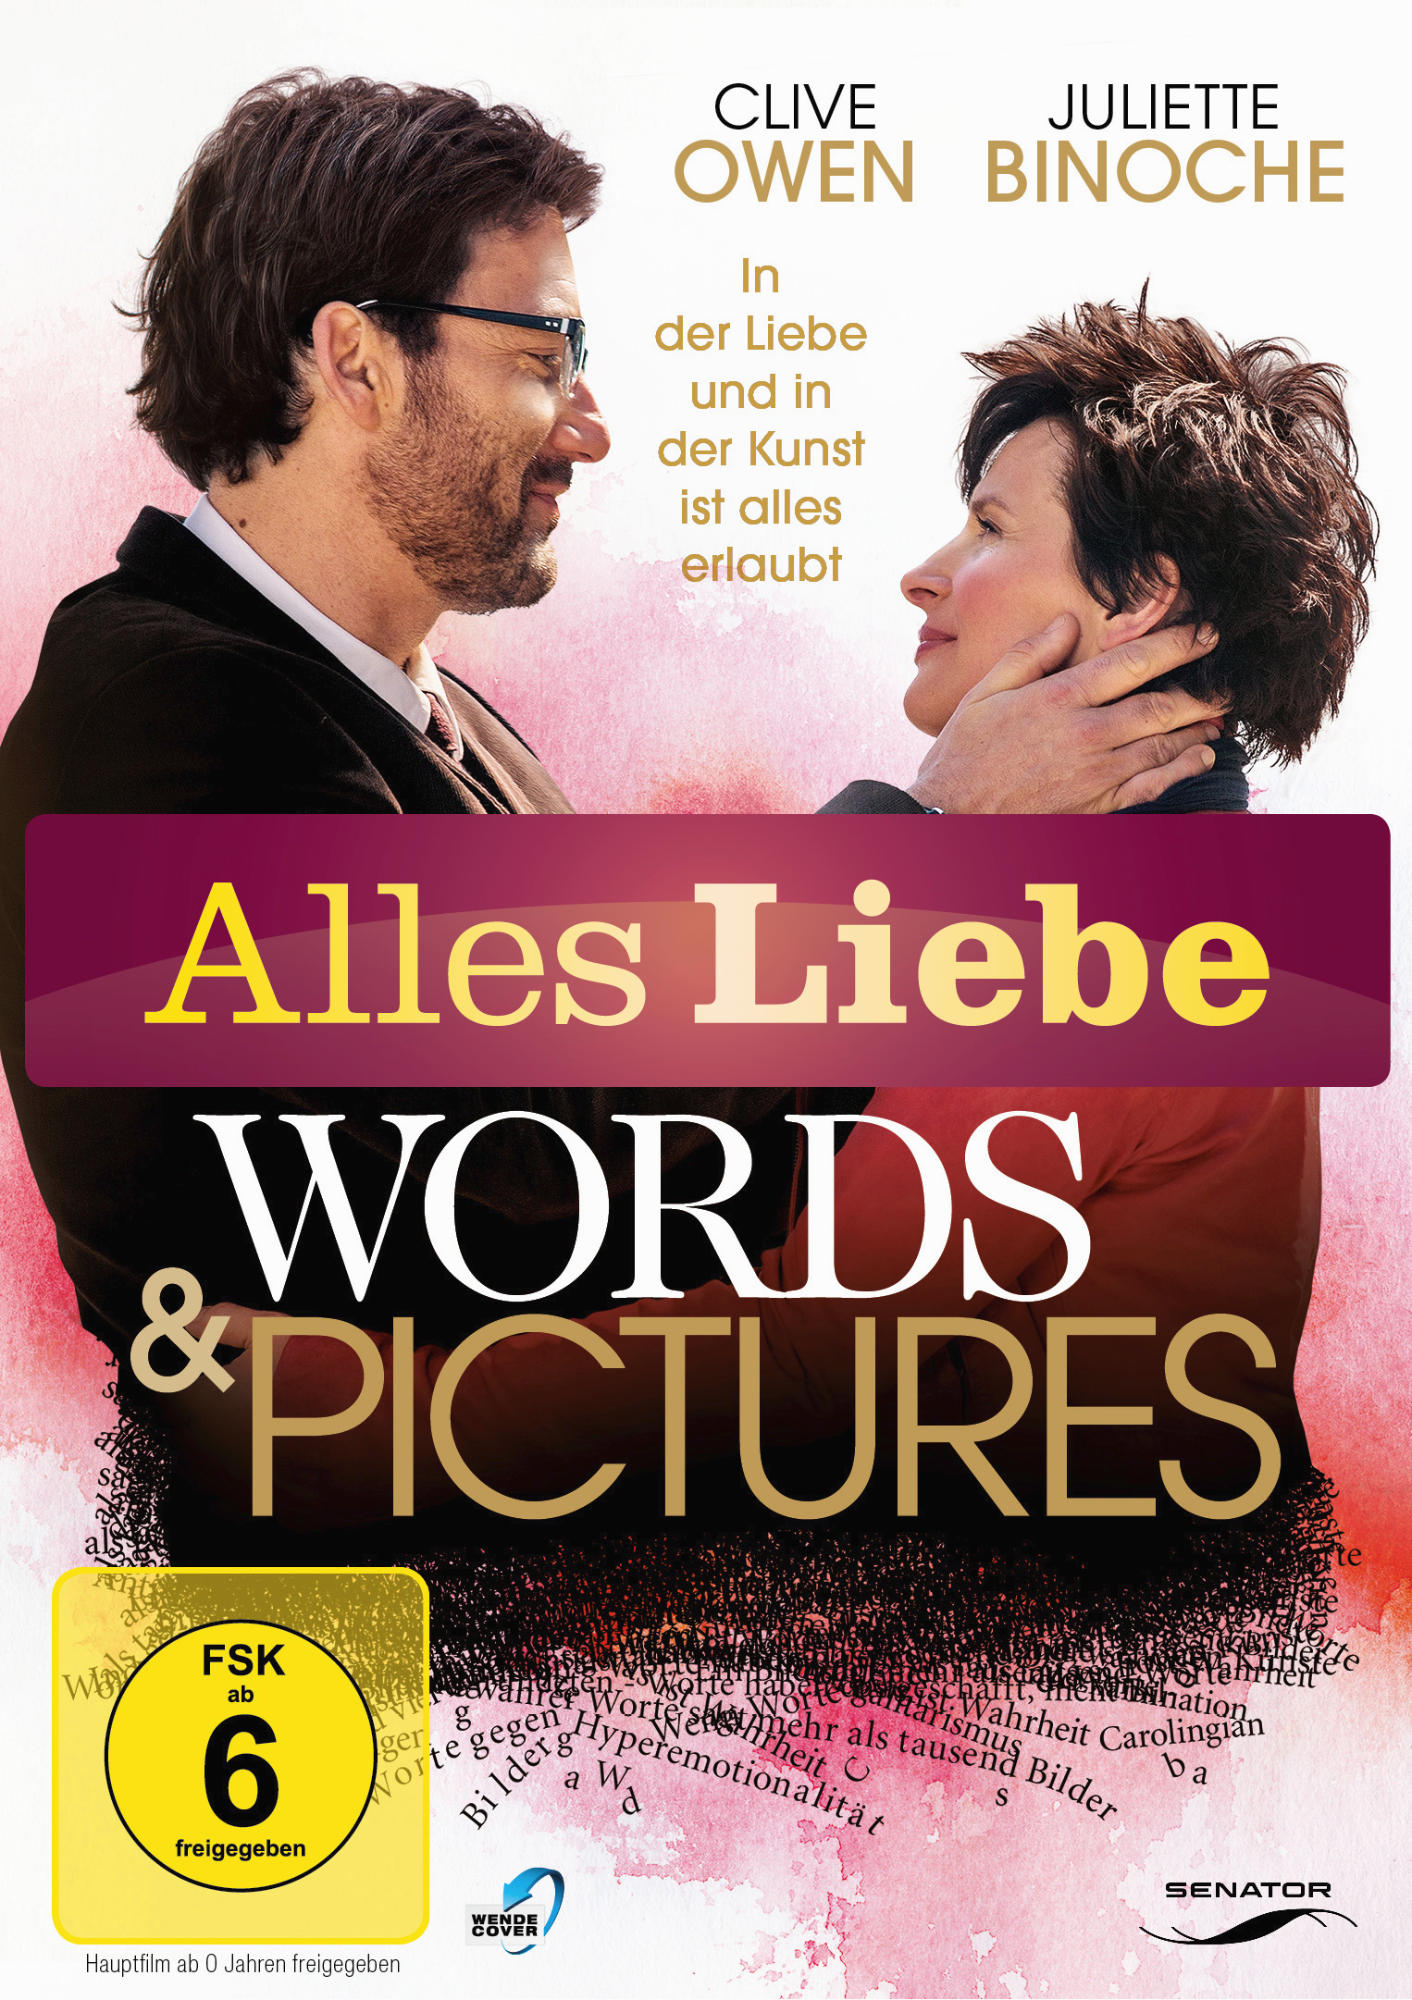 DVD and Pictures (Alles Liebe) Words